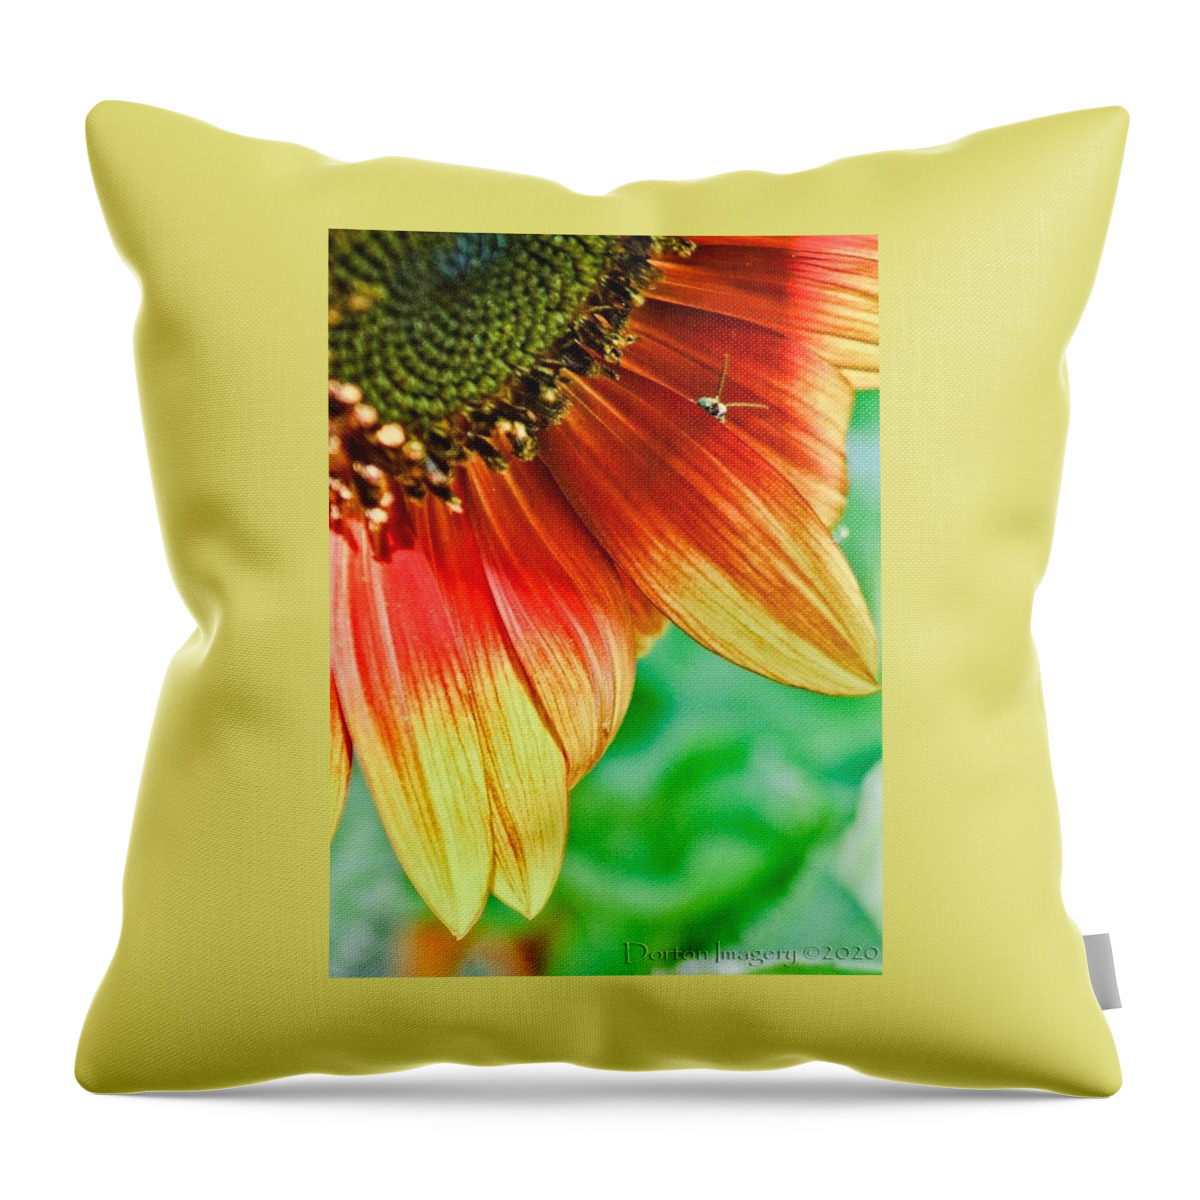  Throw Pillow featuring the photograph Sunflower #1 by Stephen Dorton